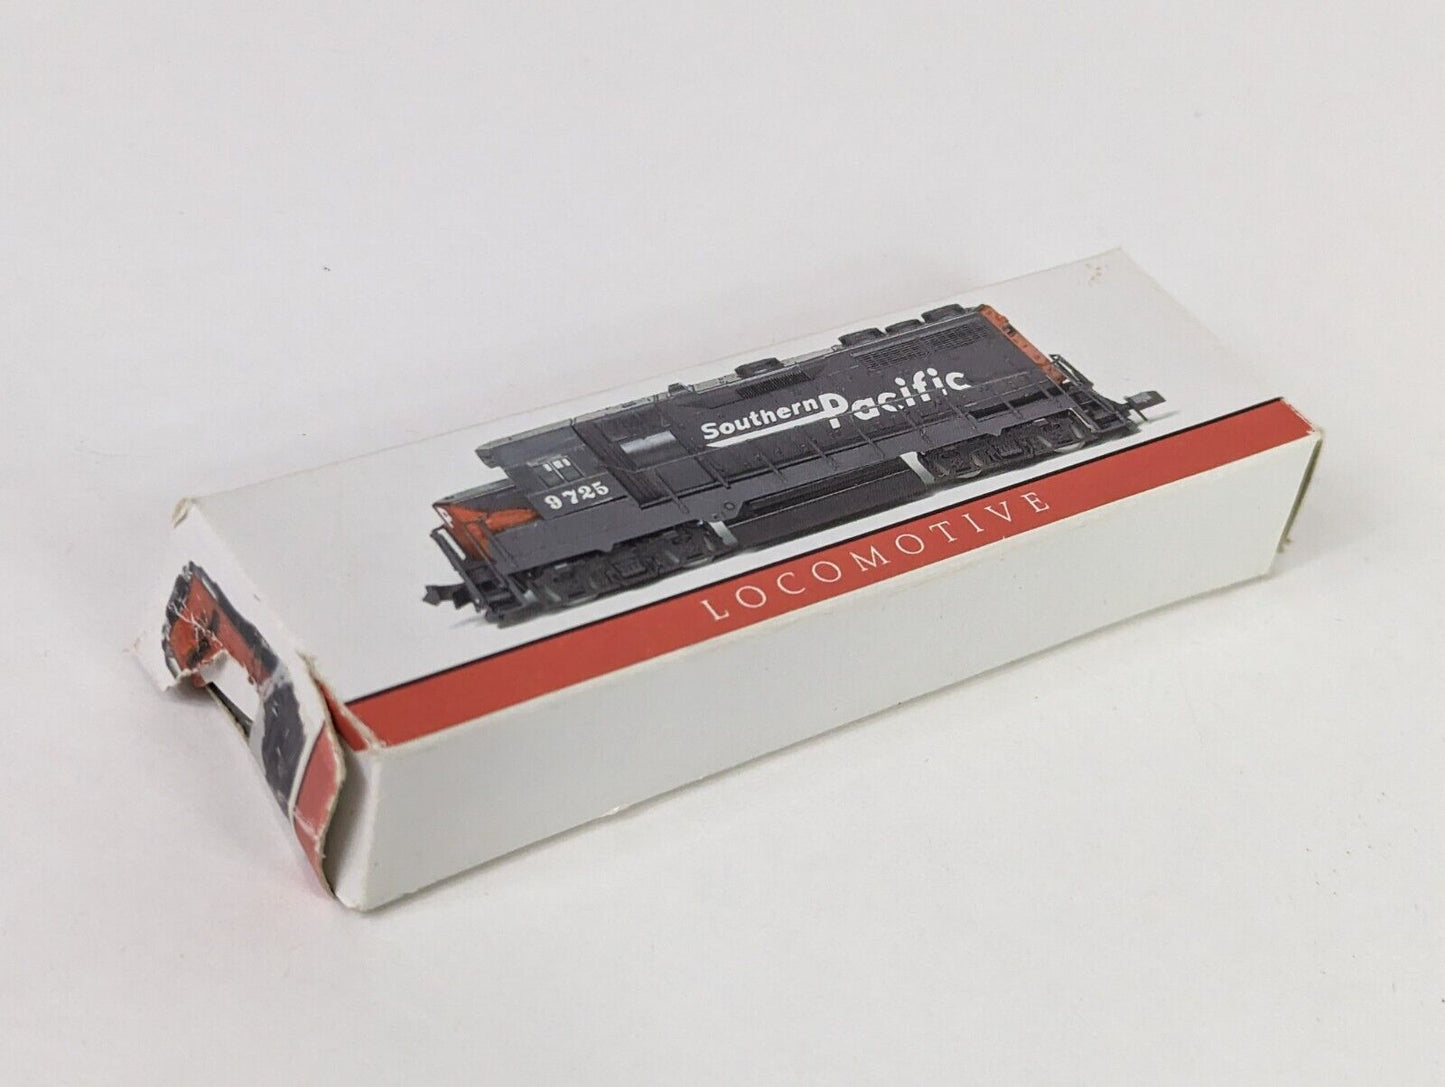 Southern Pacific Dummy Locomotive 418 N Scale Road No. 9725 High Speed Model